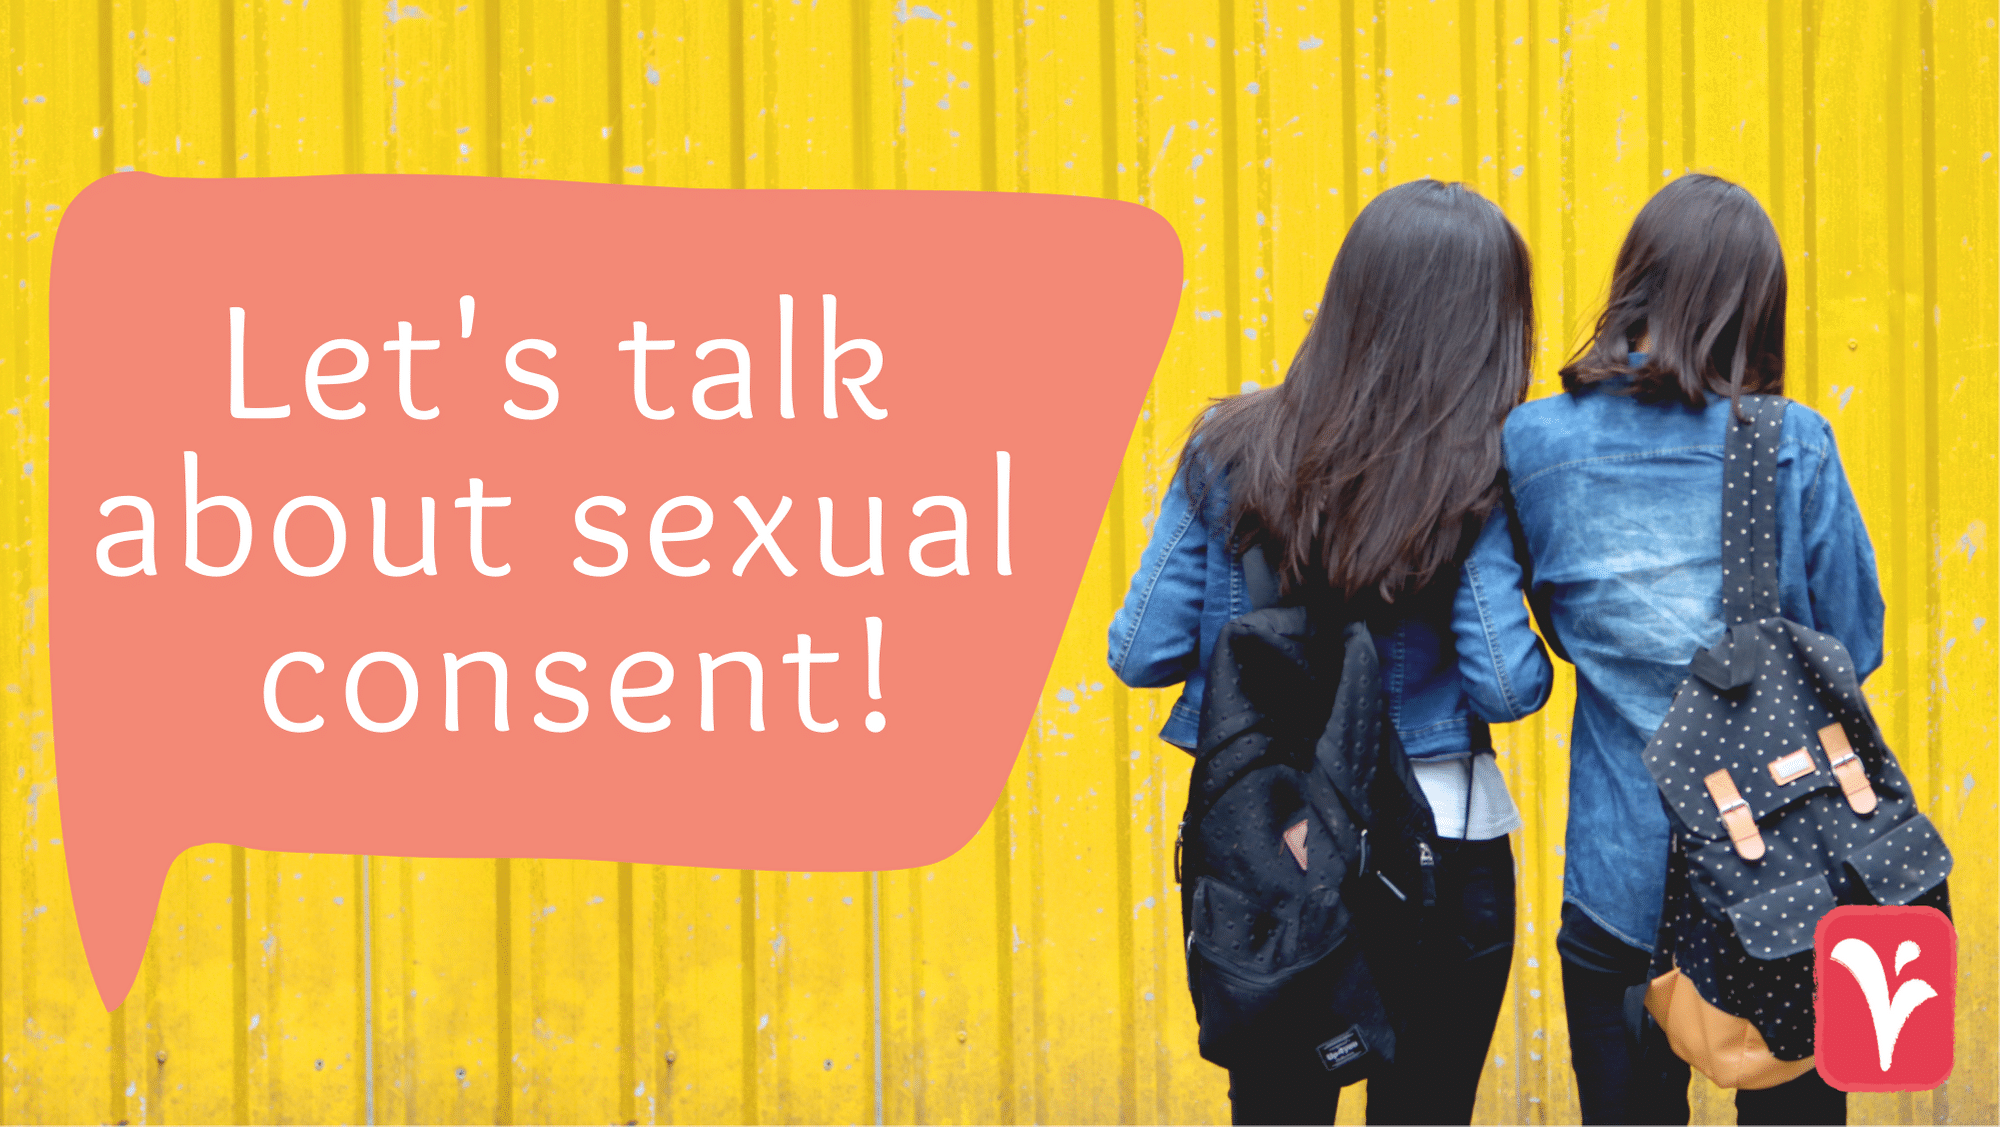 What is Consent? Let's Talk About It! Austin Women's Health Center